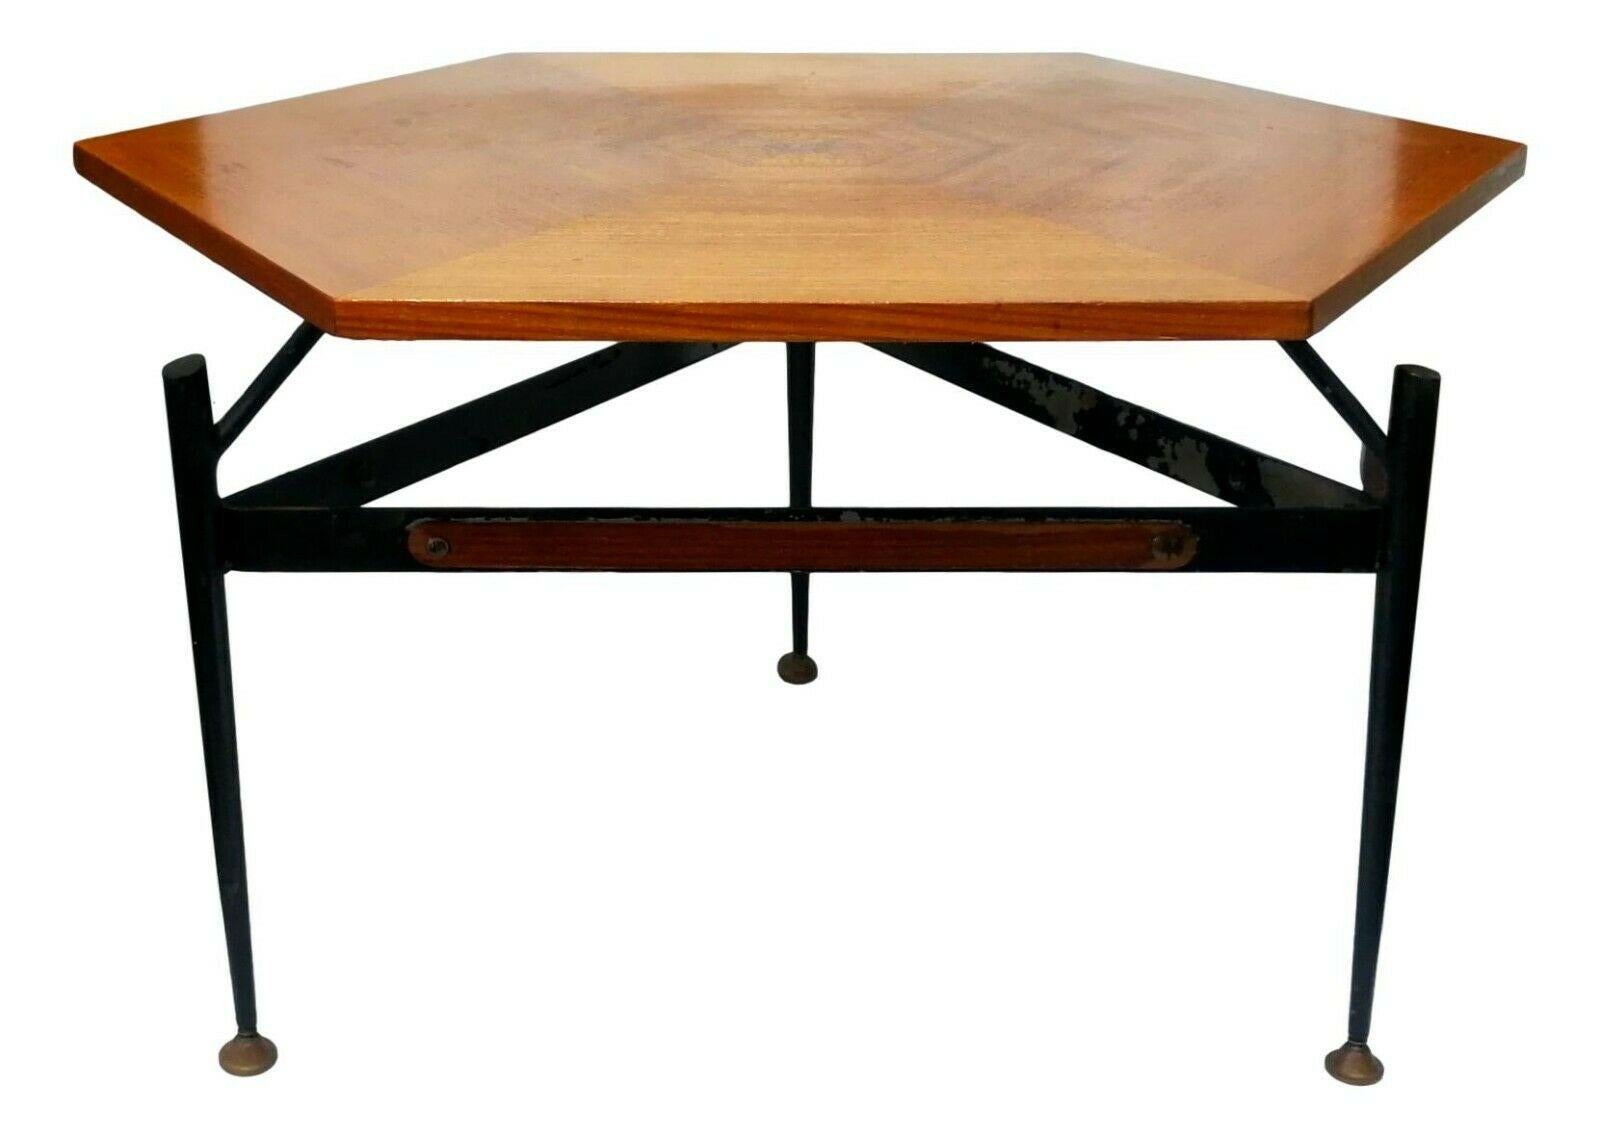 Splendid original coffee table from the 50s, design by silvio cavatorta, made with a metal structure with wooden finishes, teak top made of mosaic in six segments

It measures 42 cm in height, distance between side and side 60 cm, diagonal